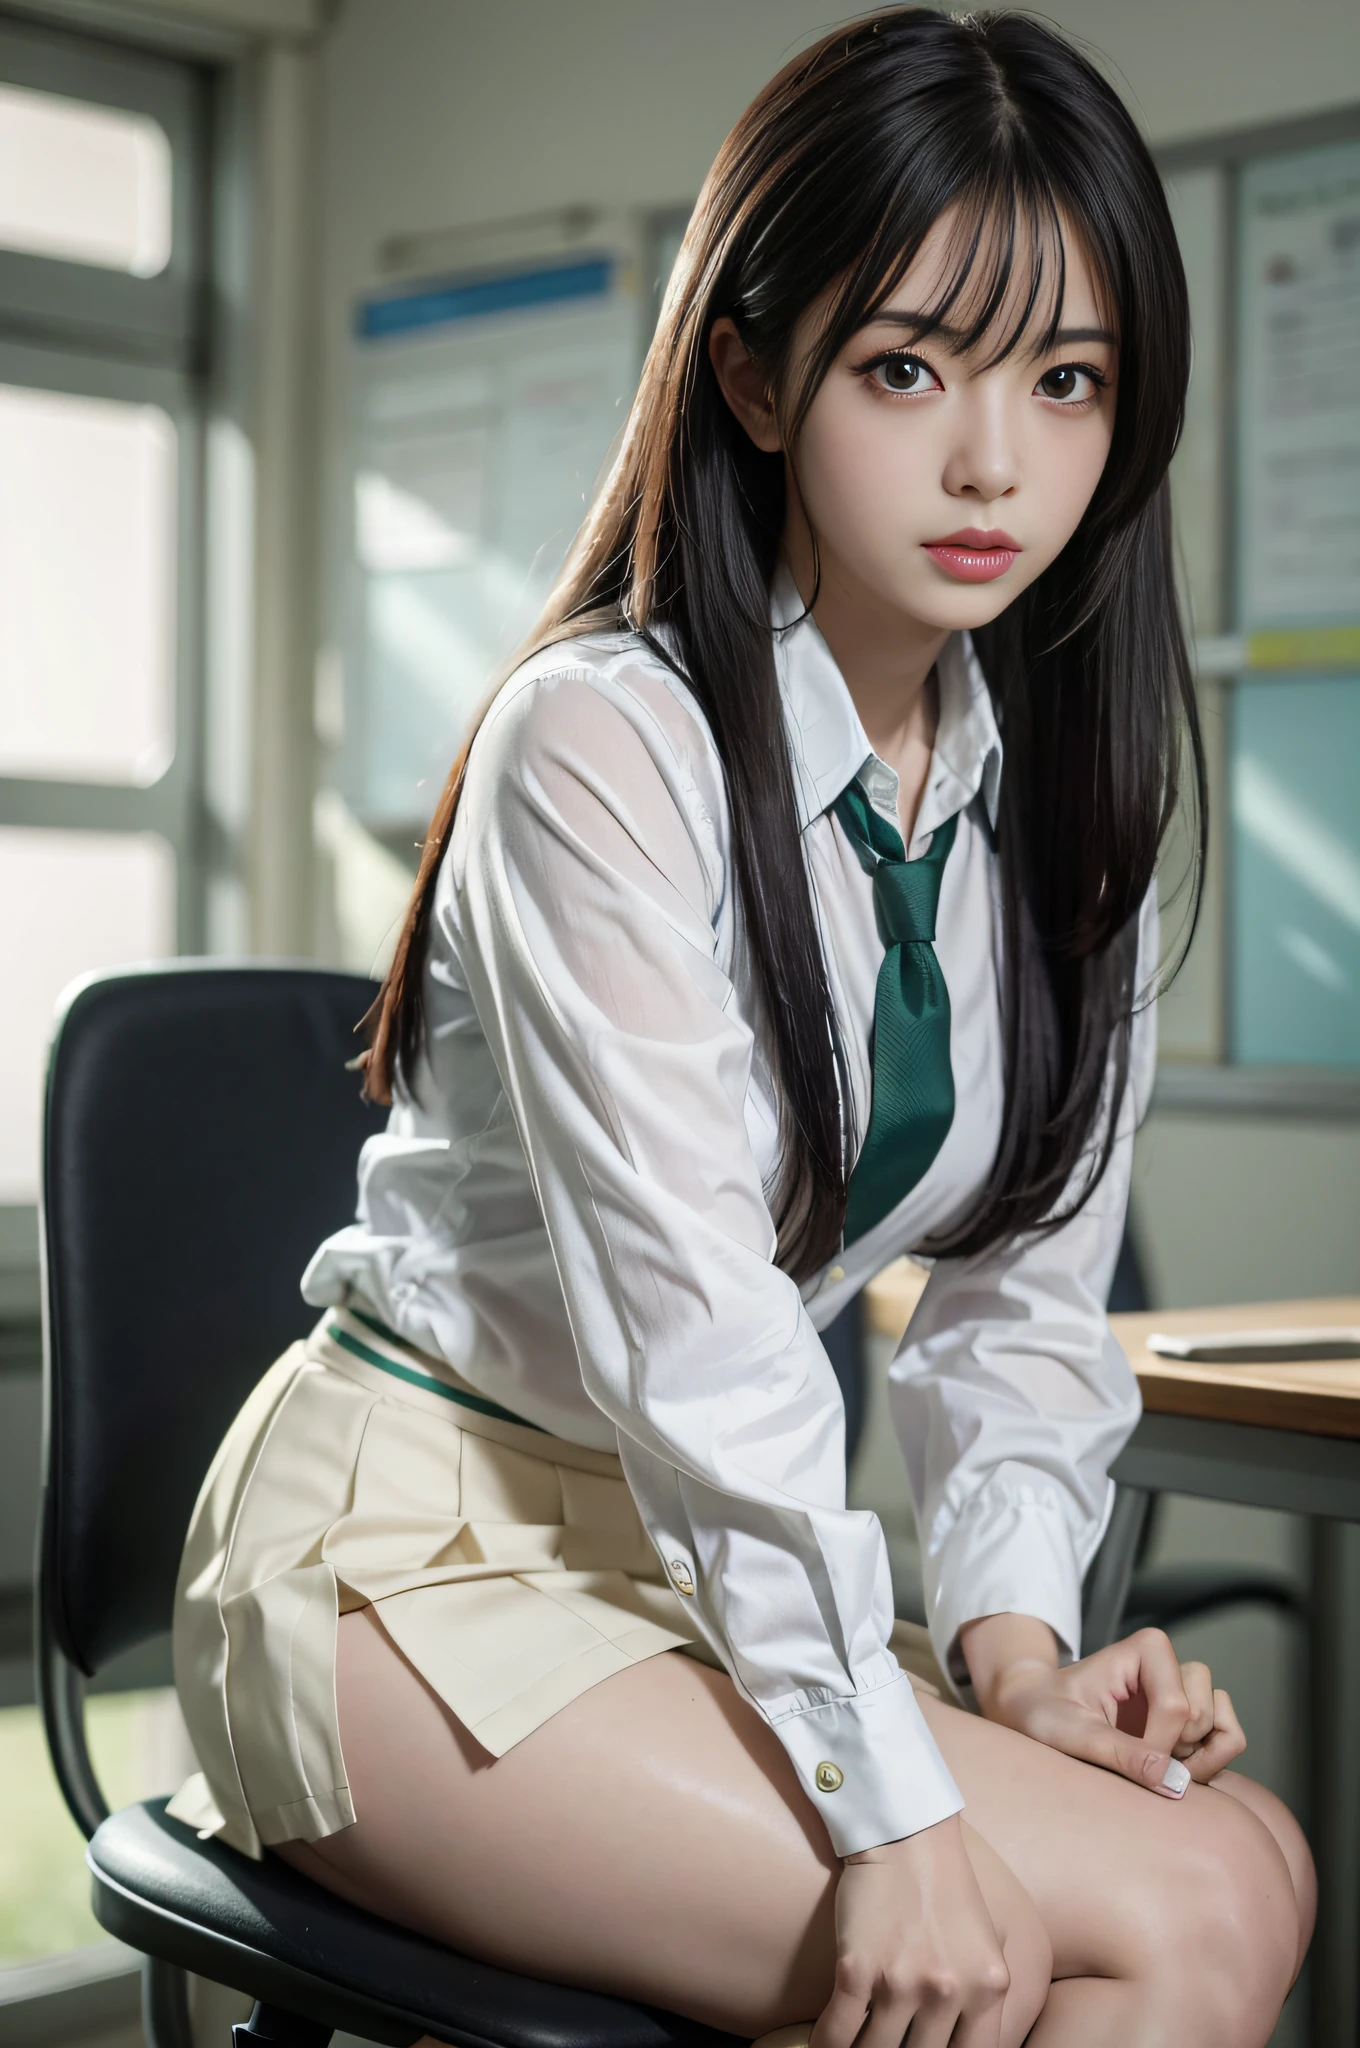 Long black hair, white skin, Chinese, young, thick eyebrows, black eyes, biting lips, white , green tie, small waist, blue short skirt, white socks, in the classroom, sitting on the desk, revealing white panties, slim legs, brown school shoes, realistic, 8k, masterpiece, high resolution, high resolution, anatomically correct, high resolution, inspired by Marin Kitagawa in anime